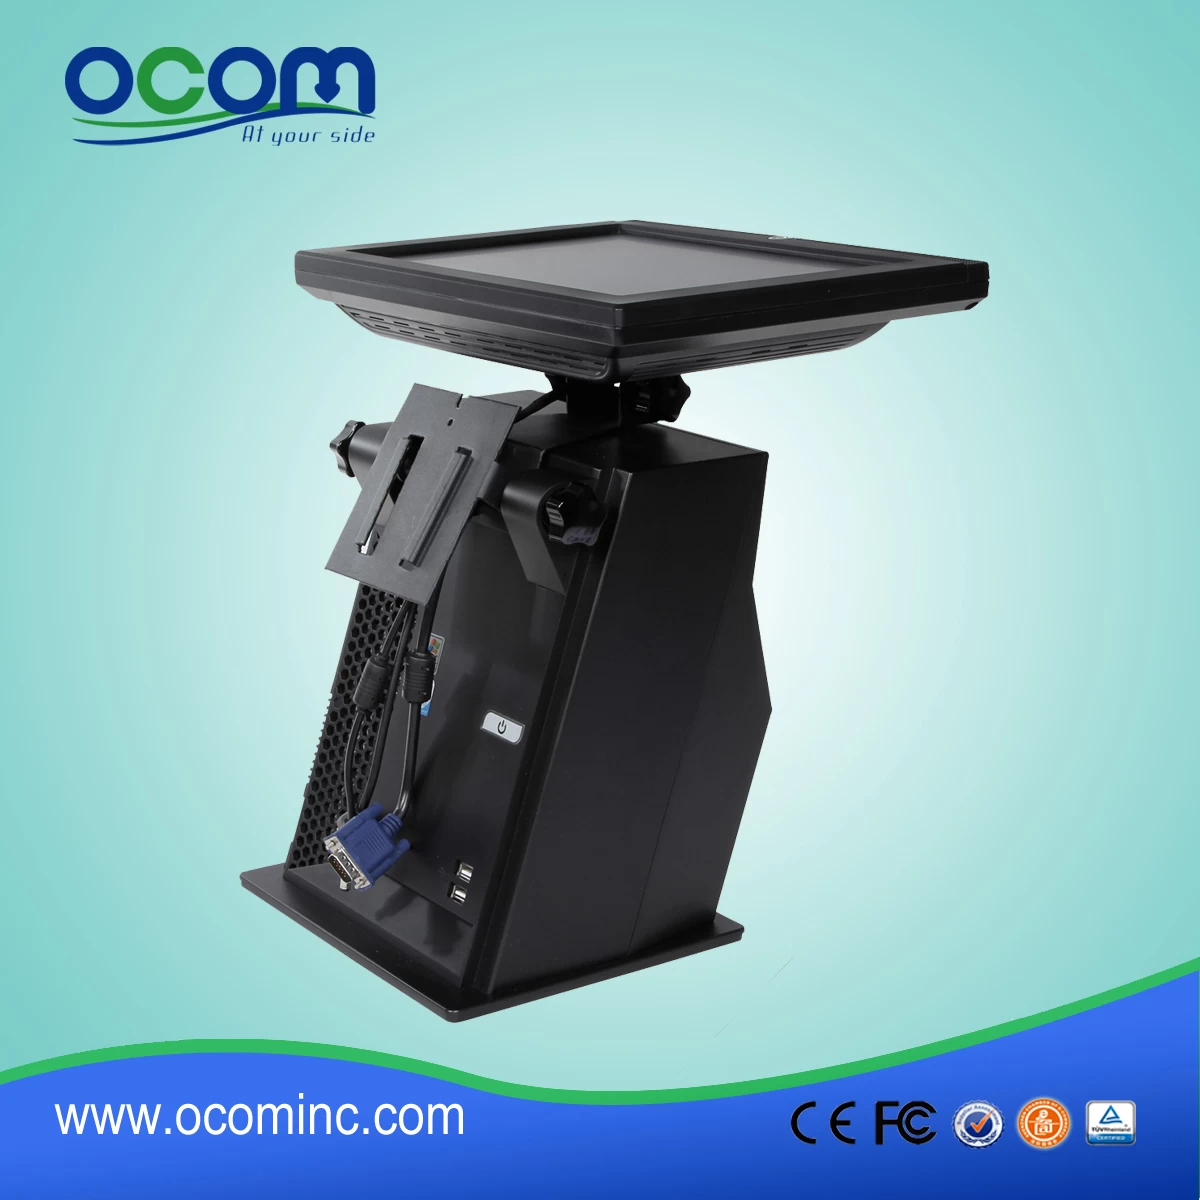 15 Inch All-In-One Touch Screen POS Machine(POS-8820)